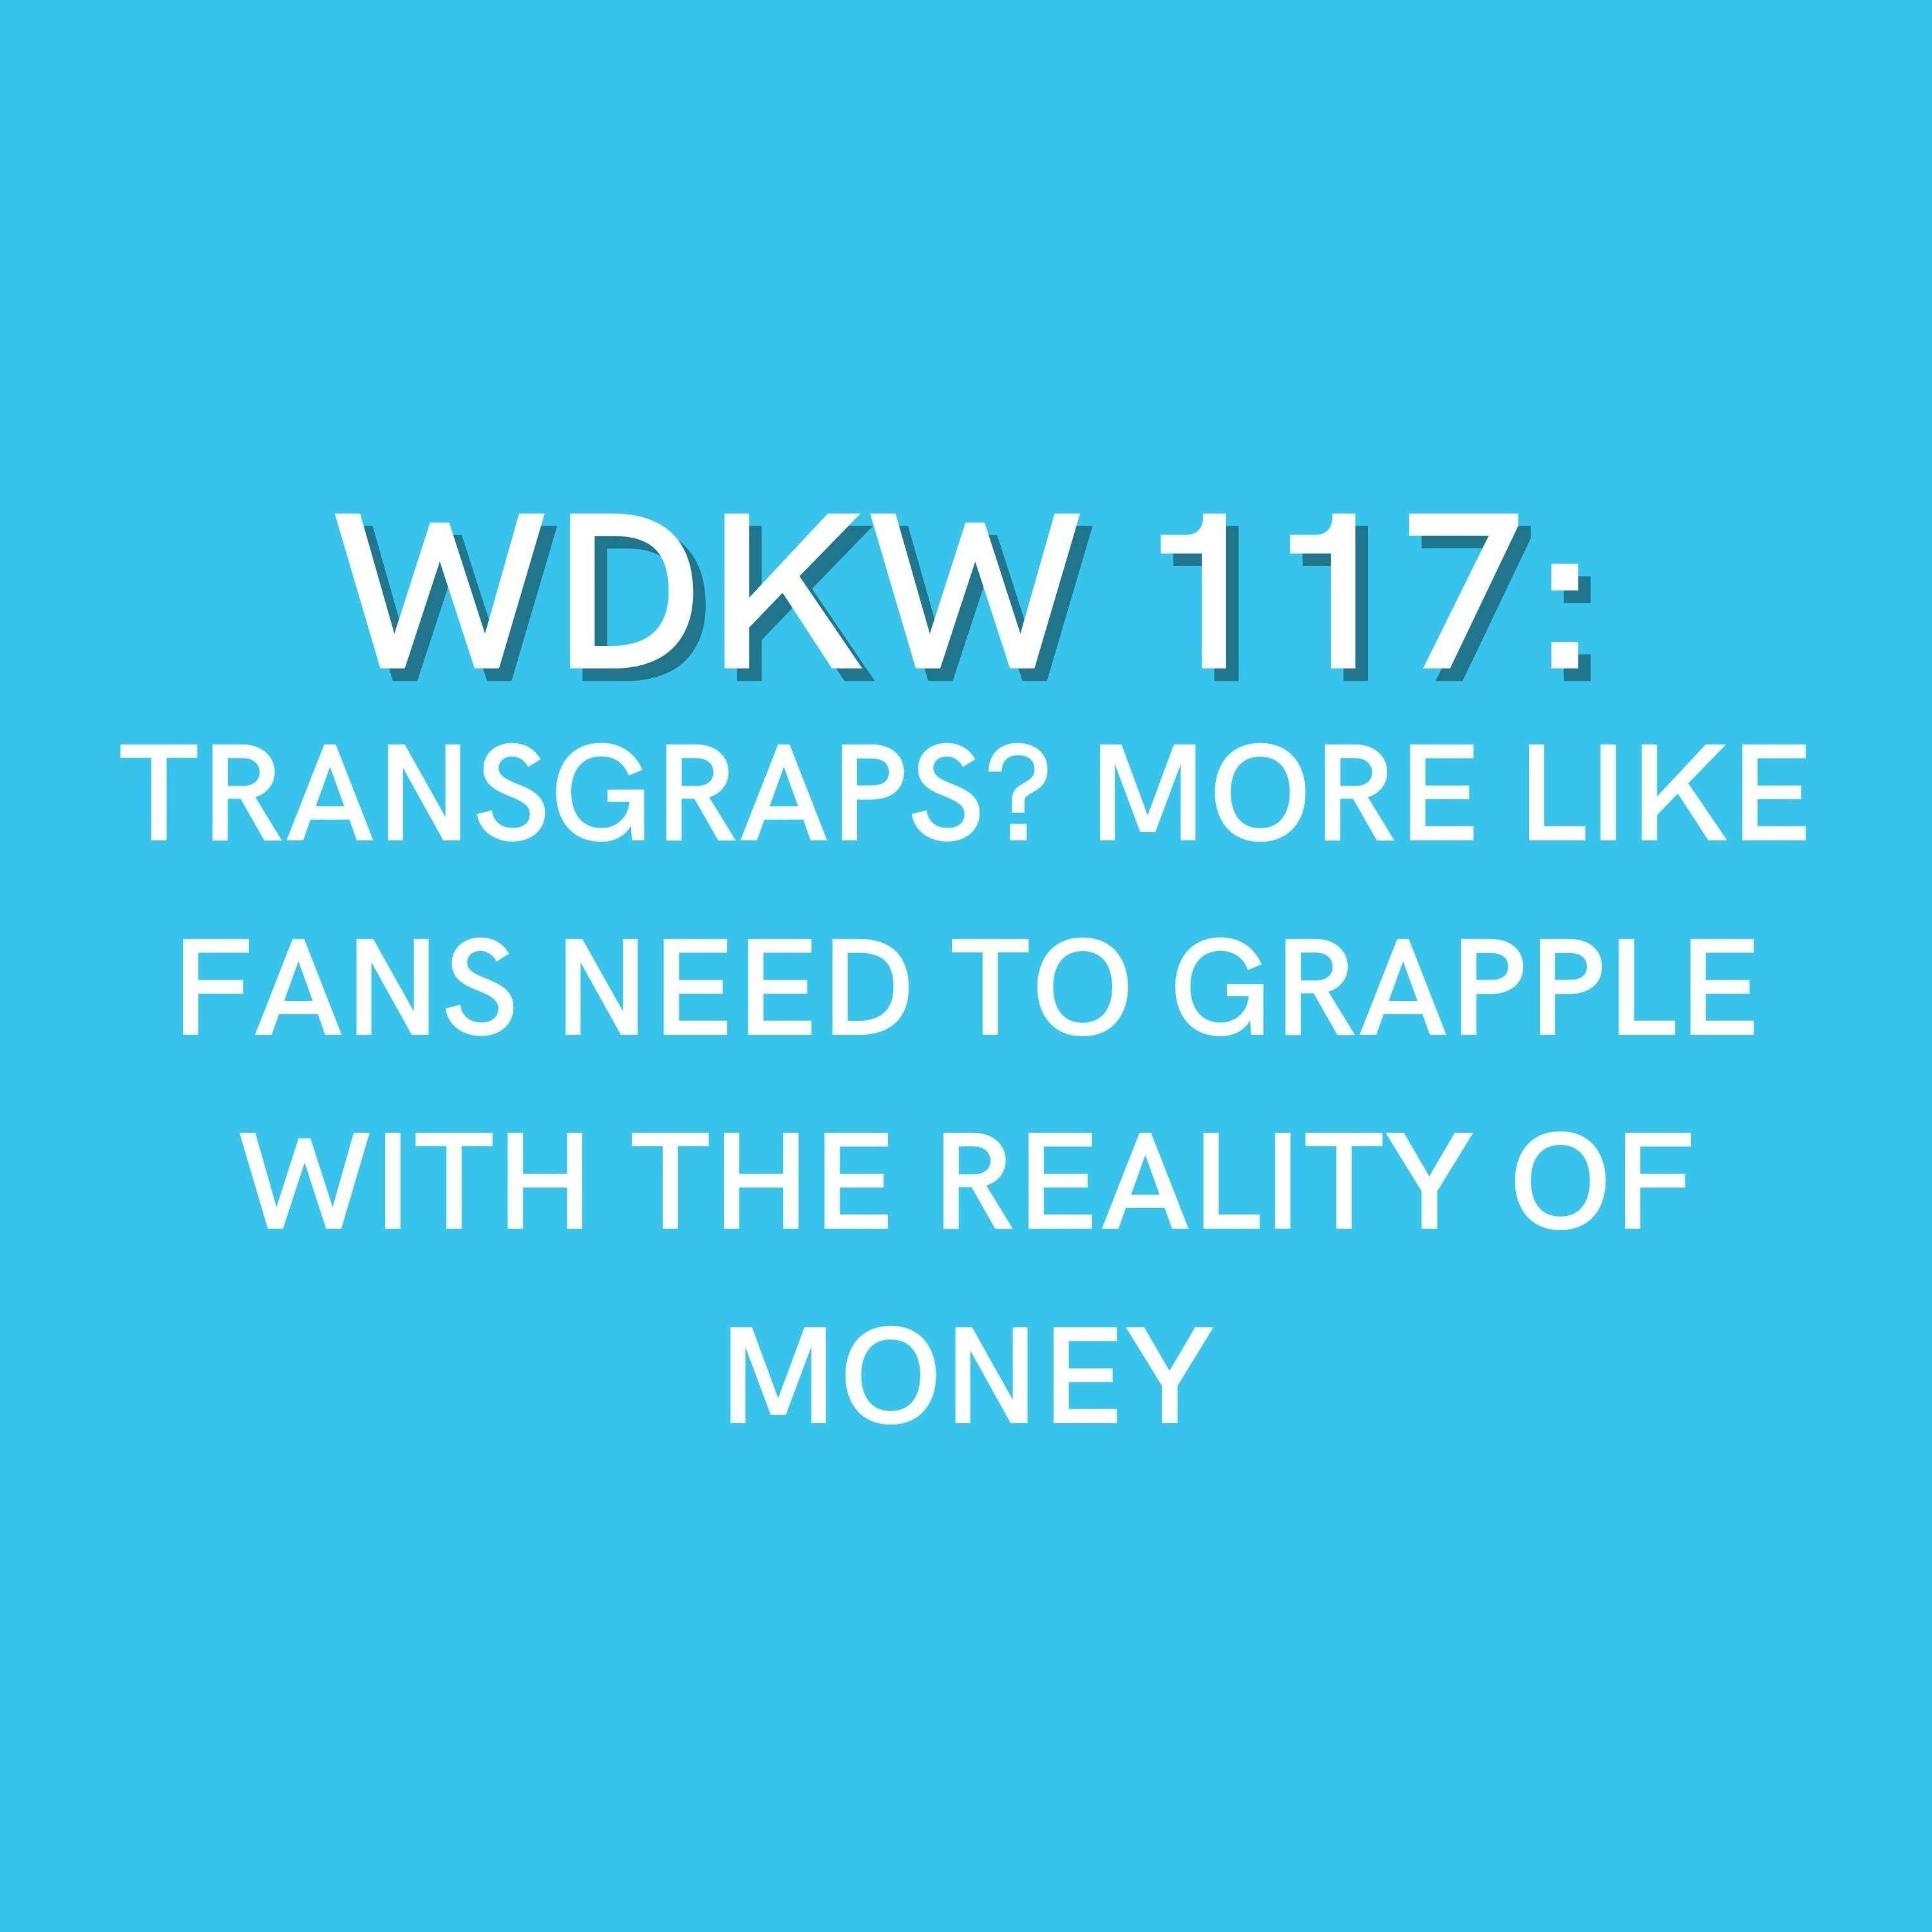 WDKW 117: TRANSGRAPS? MORE LIKE FANS NEED TO GRAPPLE WITH THE REALITY OF MONEY